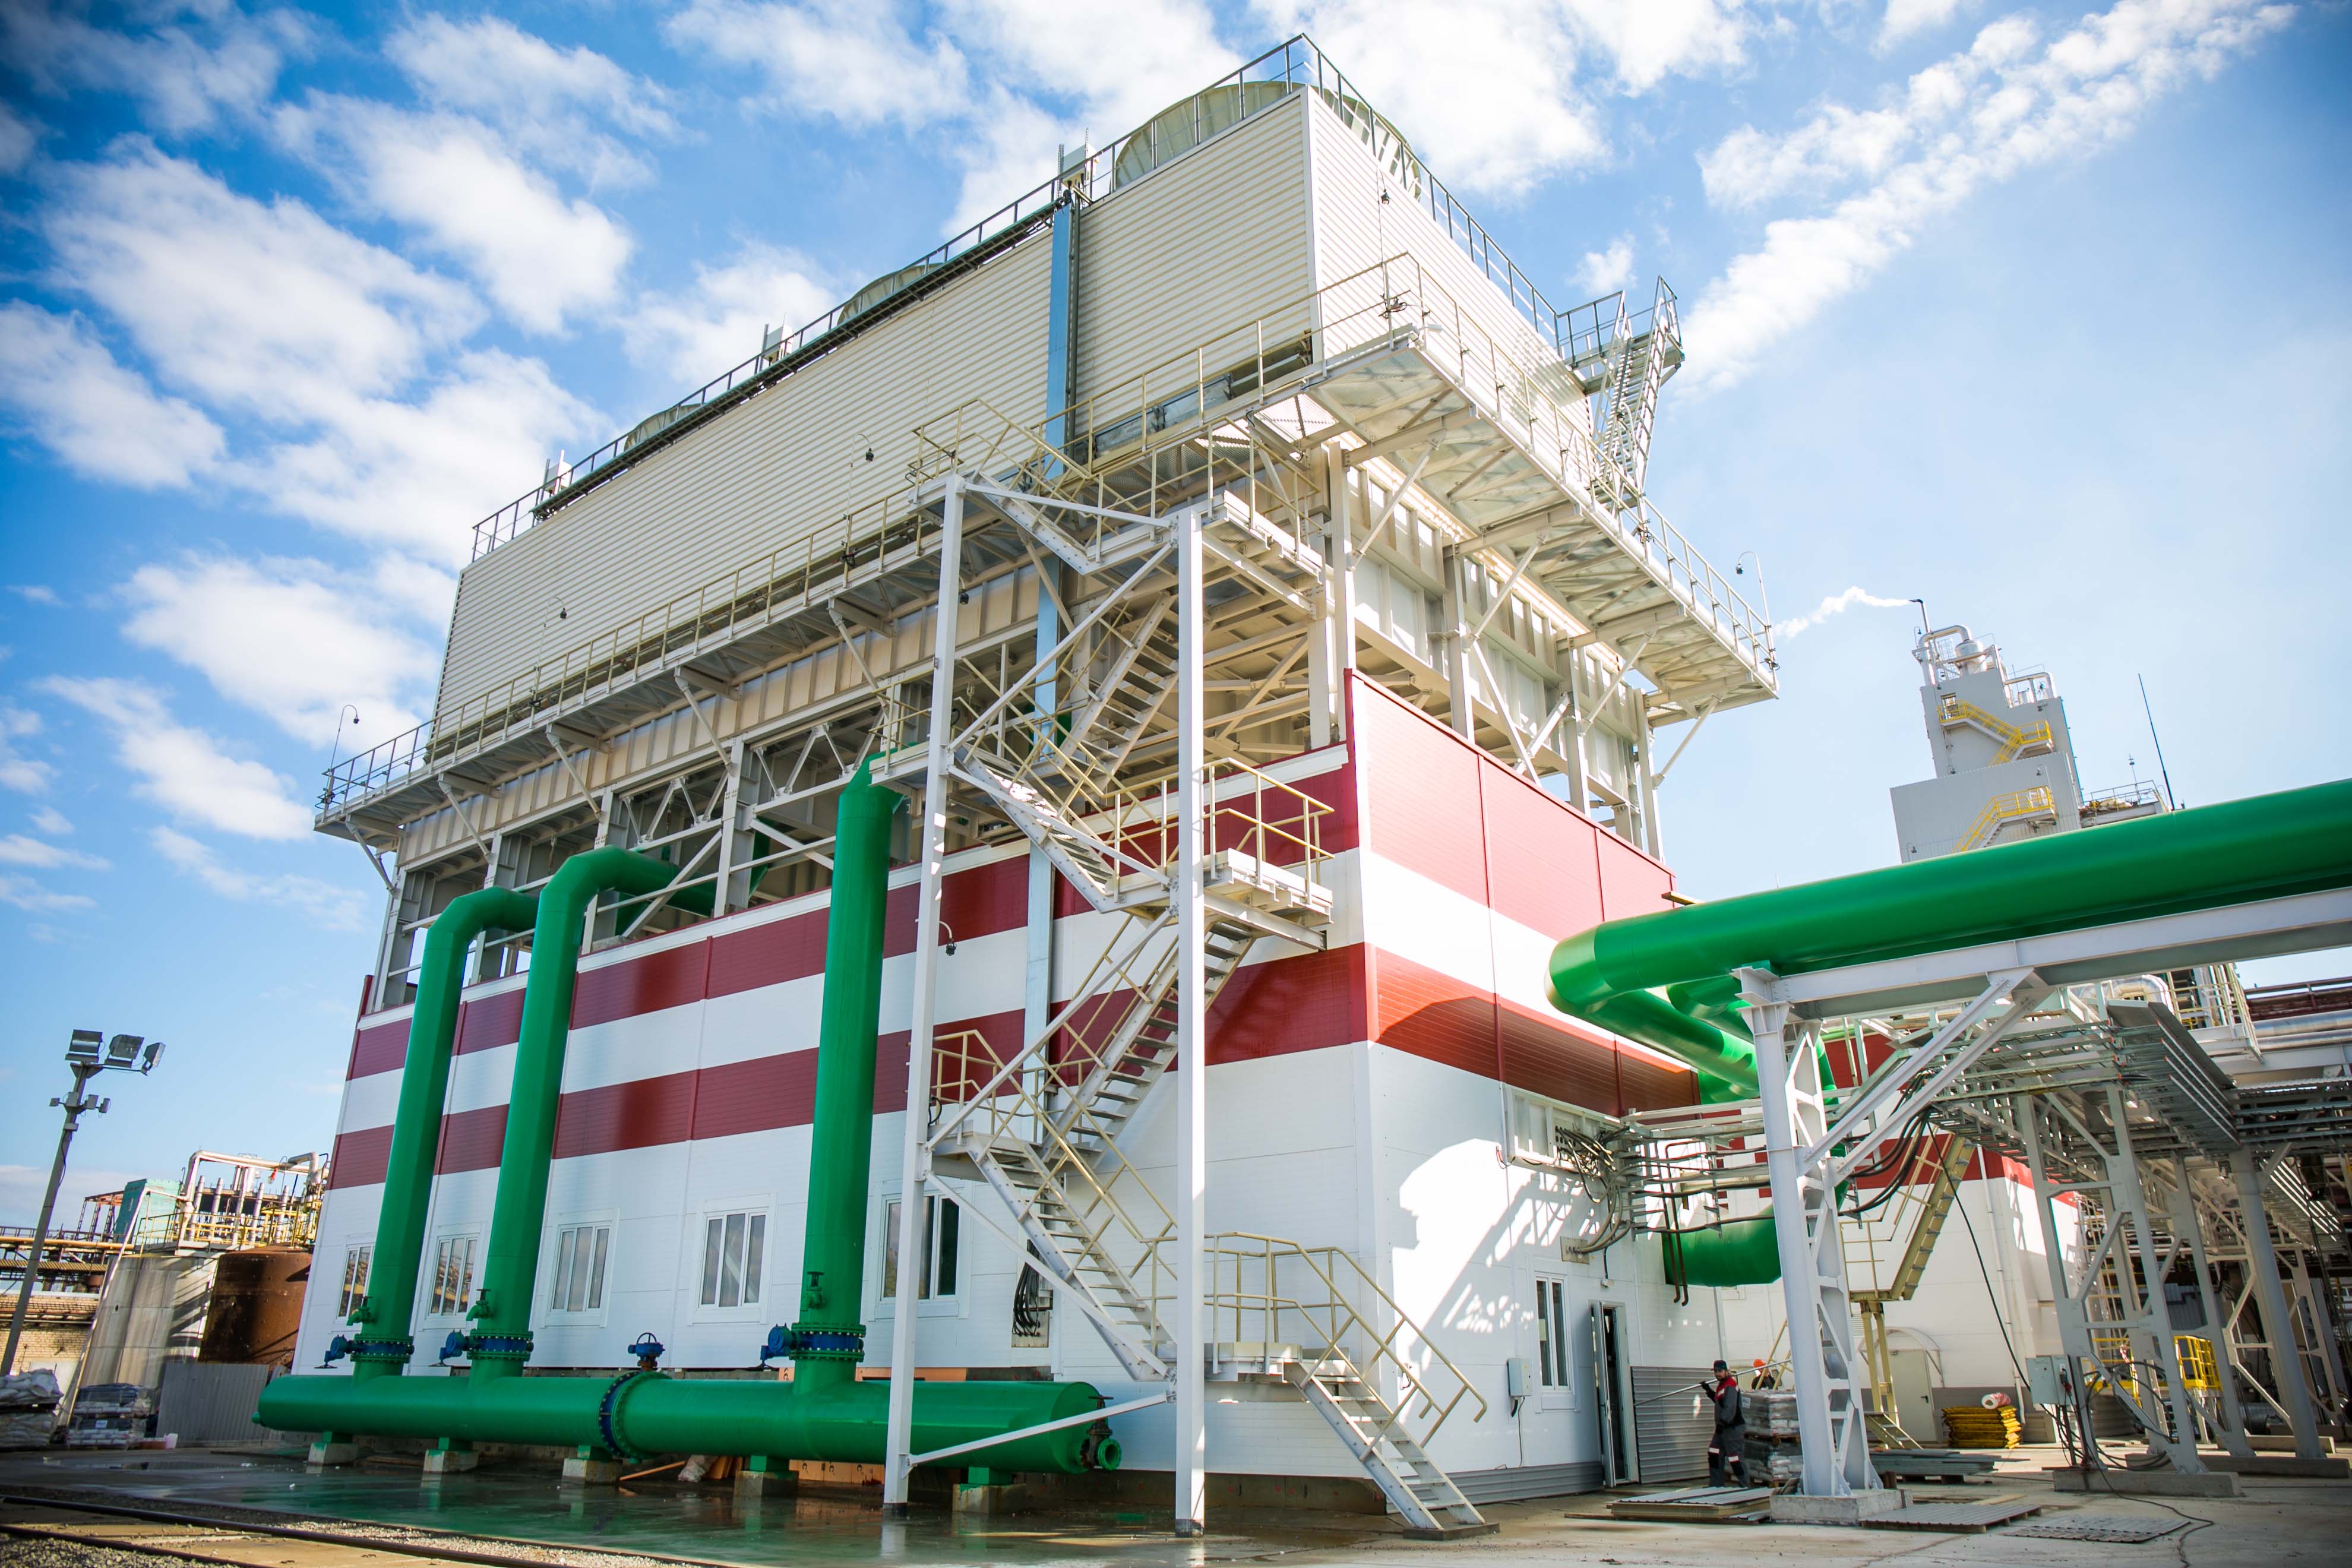 The modernized urea unit with NIIK technology was commissioned at PJSC Acron in Veliky Novgorod